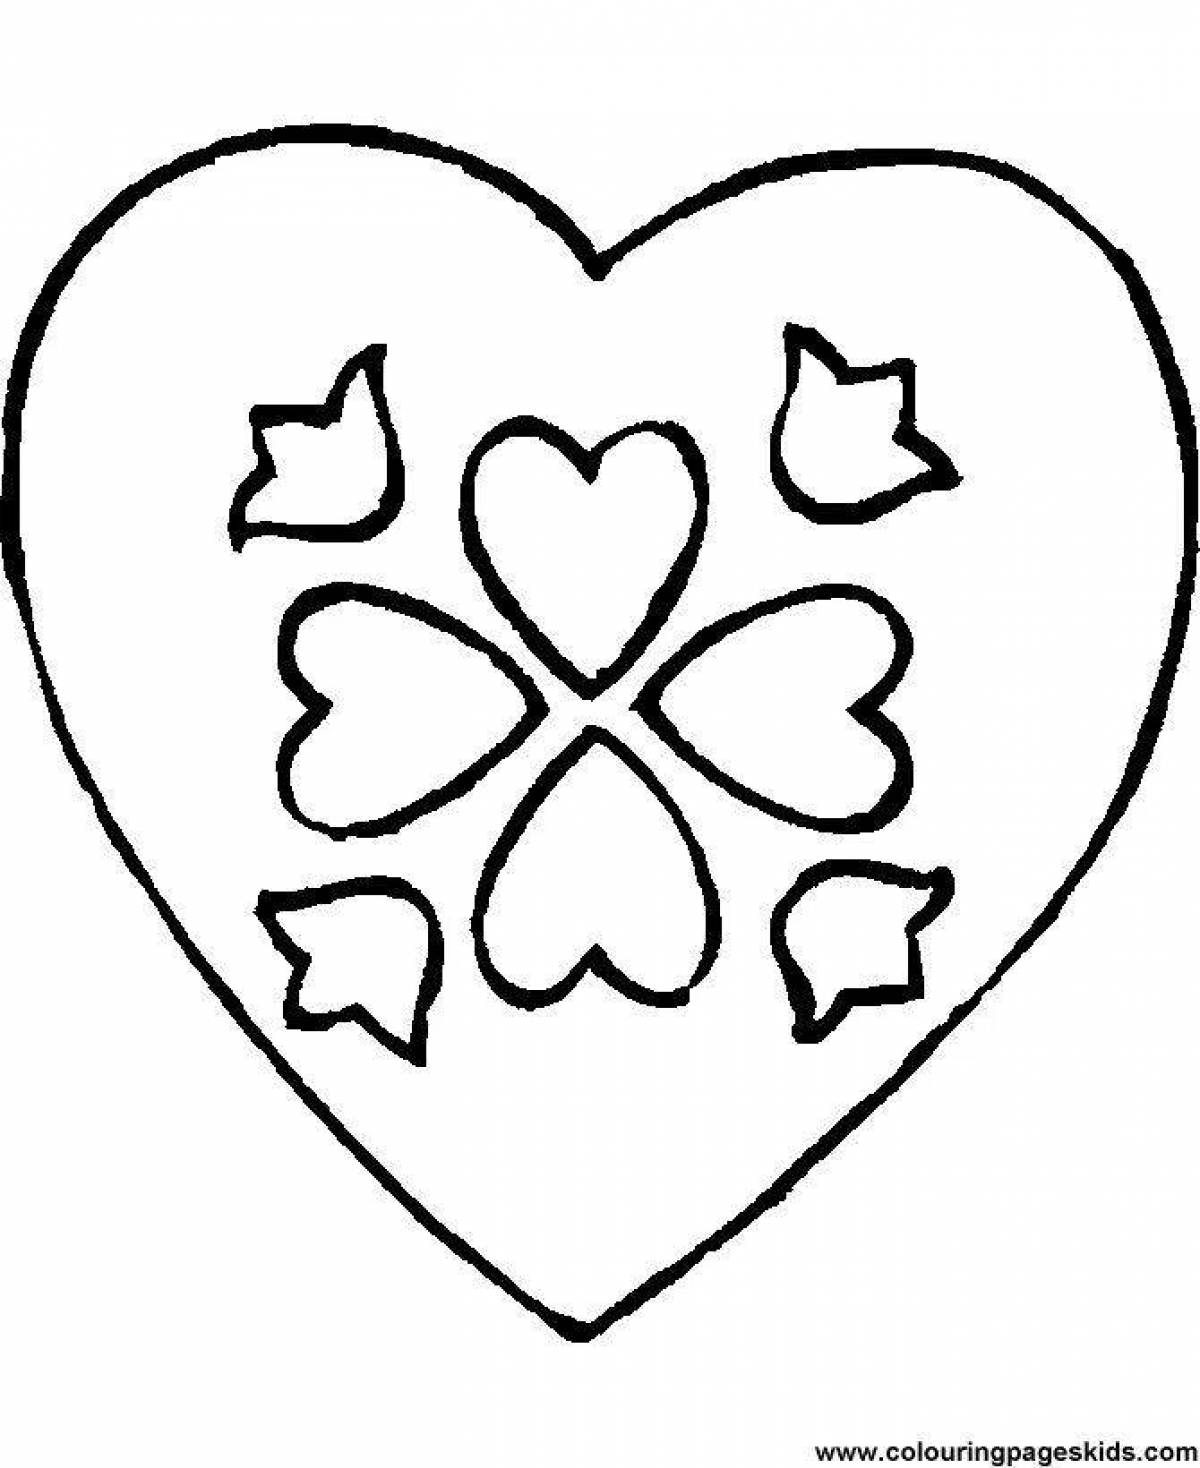 Colorful heart coloring book for 4-5 year olds